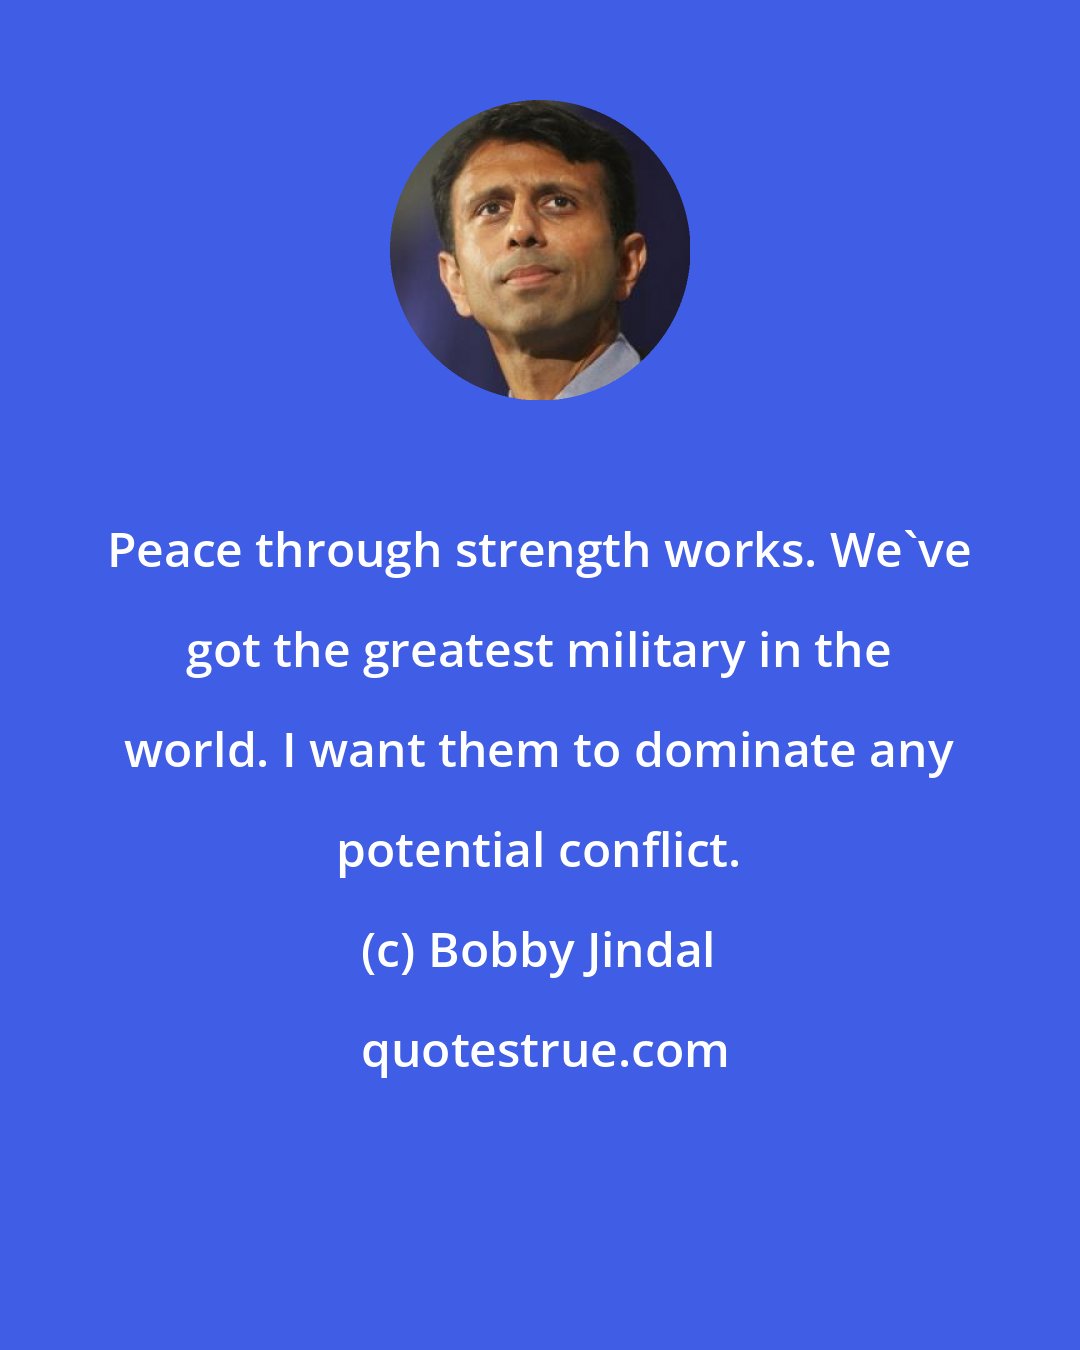 Bobby Jindal: Peace through strength works. We've got the greatest military in the world. I want them to dominate any potential conflict.